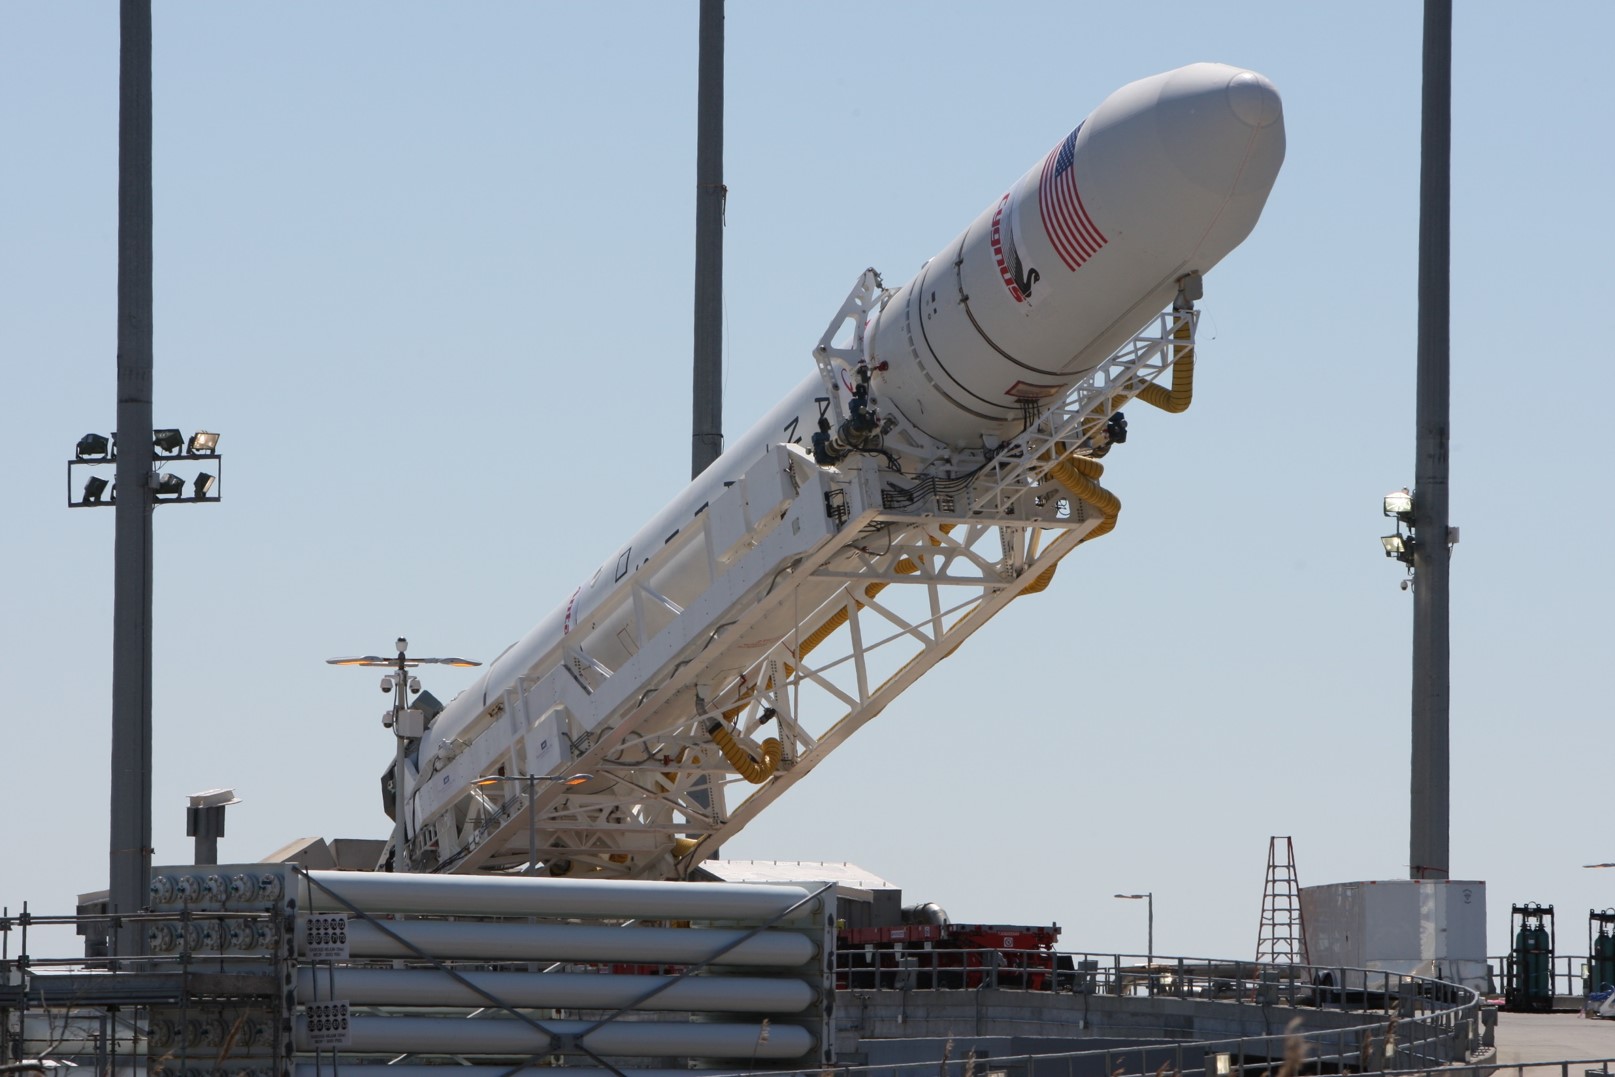 Orbital Sciences will honor the memory and achievements of G. David Low with its second Antares launch and the culmation of the Commercial Orbital Transportation Services (COTS) contract with NASA. Photo Credit: Mark Usciak / AmericaSpace